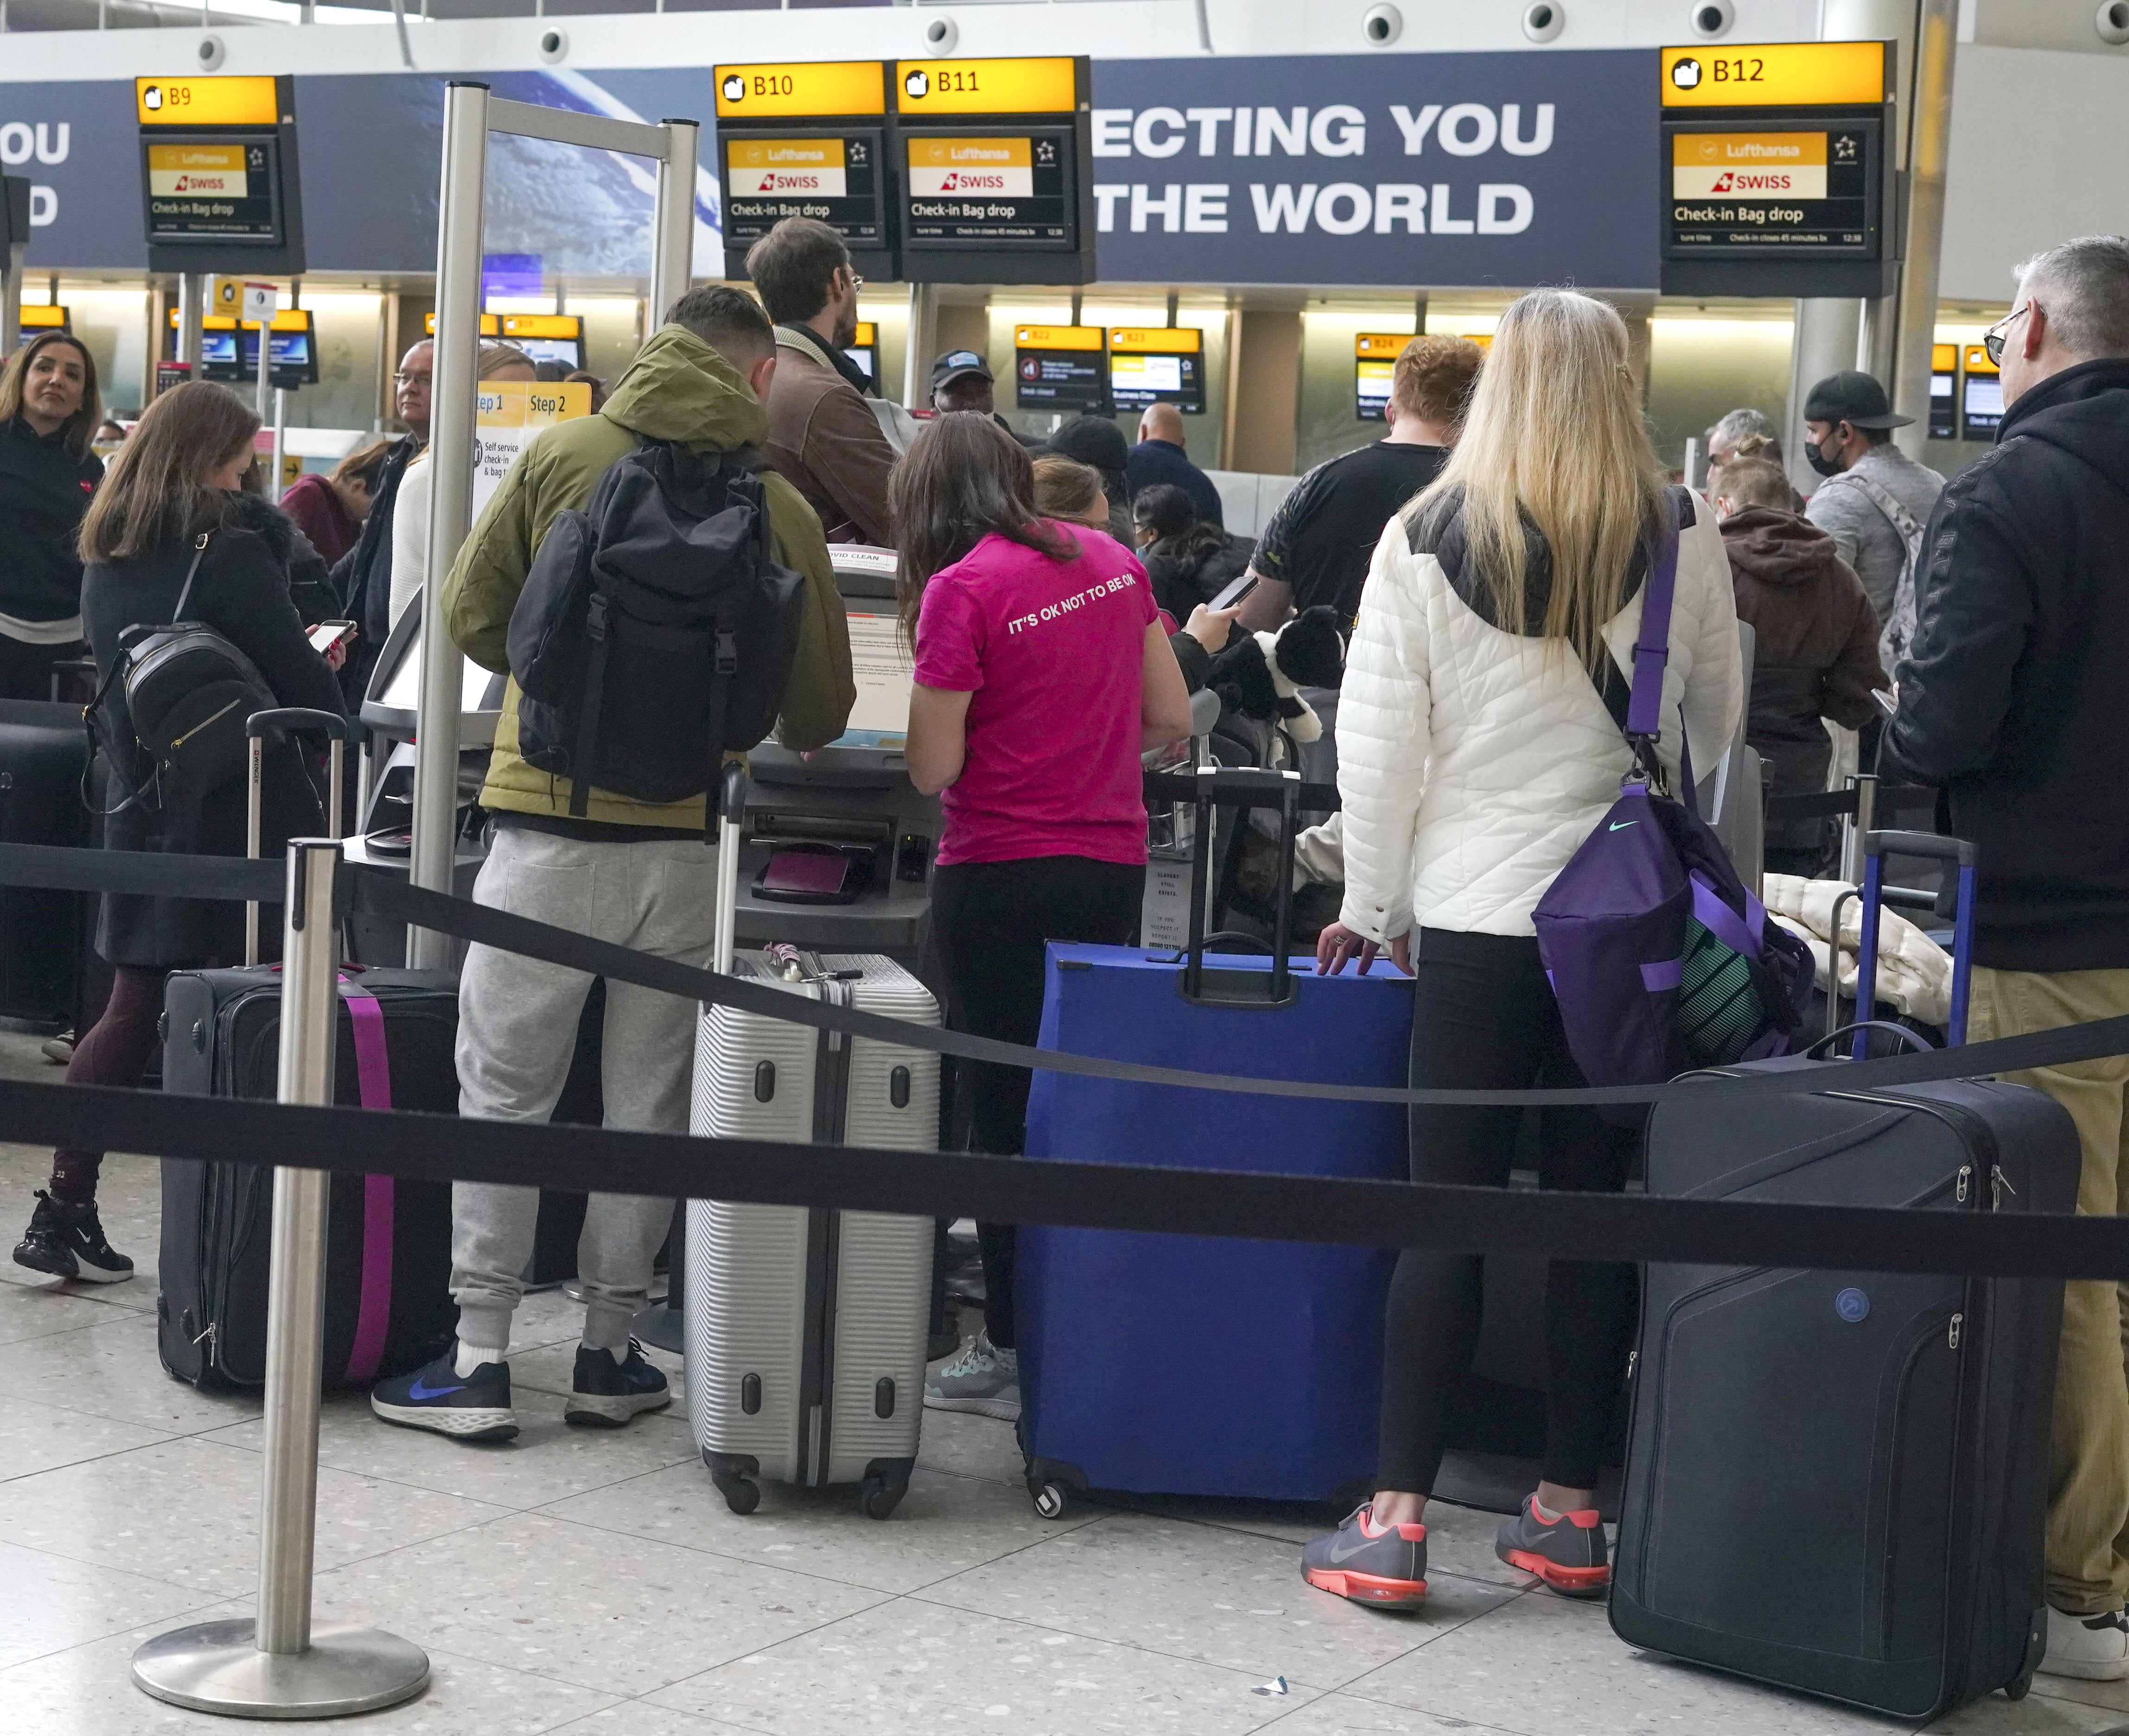 Airlines have been accused of ‘harmful practices’ in their treatment of passengers affected by disruption (Steve Parsons/PA)